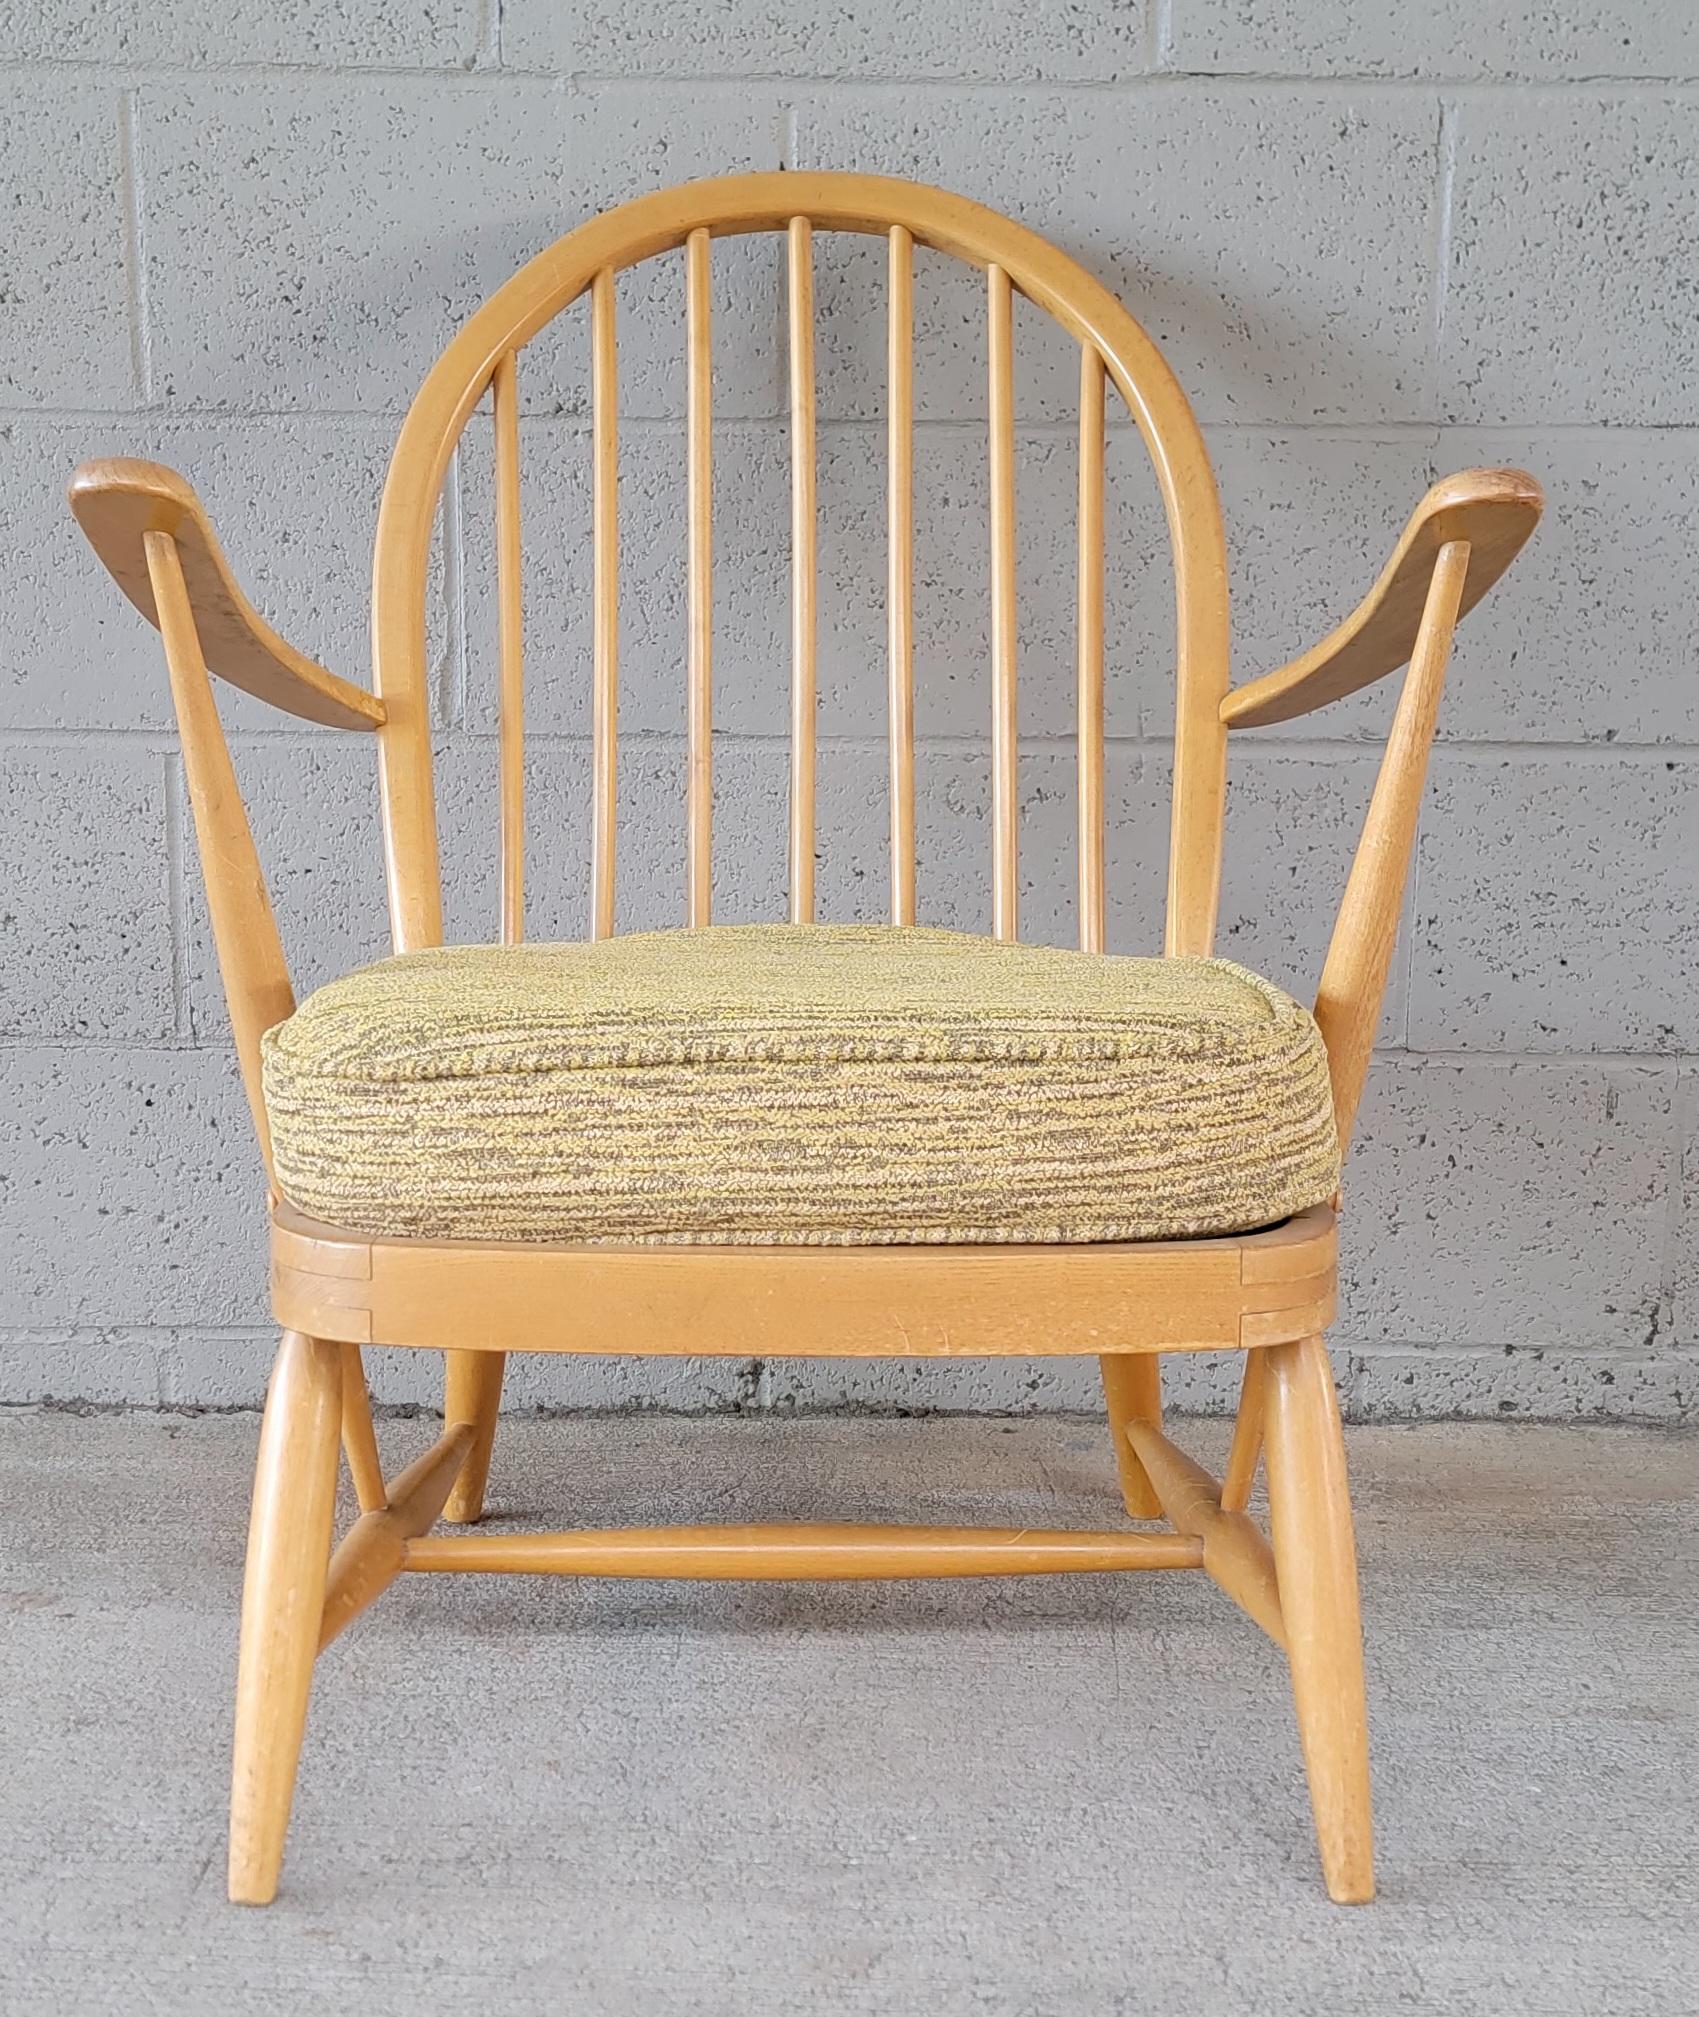 Hoop back beech wood armchair designed by Lucian Ercolani for Ercol. England circa. 1960. Retains Ercol label. Original finish and condition with wear and patina. Structurally solid. Original fabric could be saved, but needs new foam.